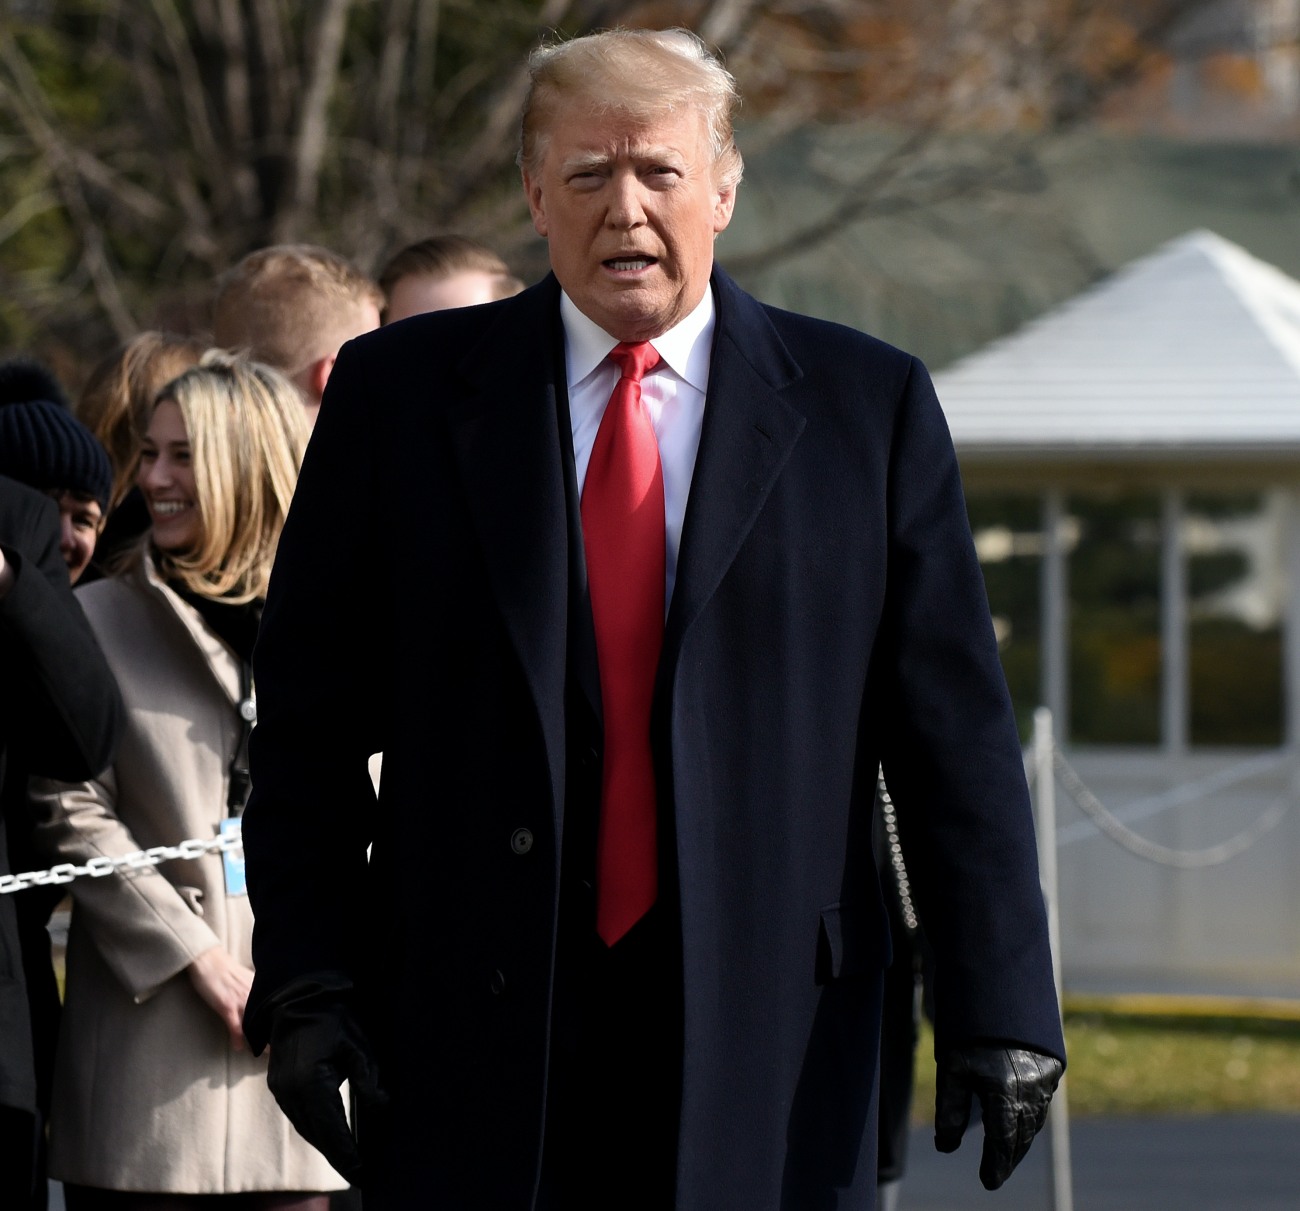 Trump departs the White House to attend the 119th Army-Navy Football Game